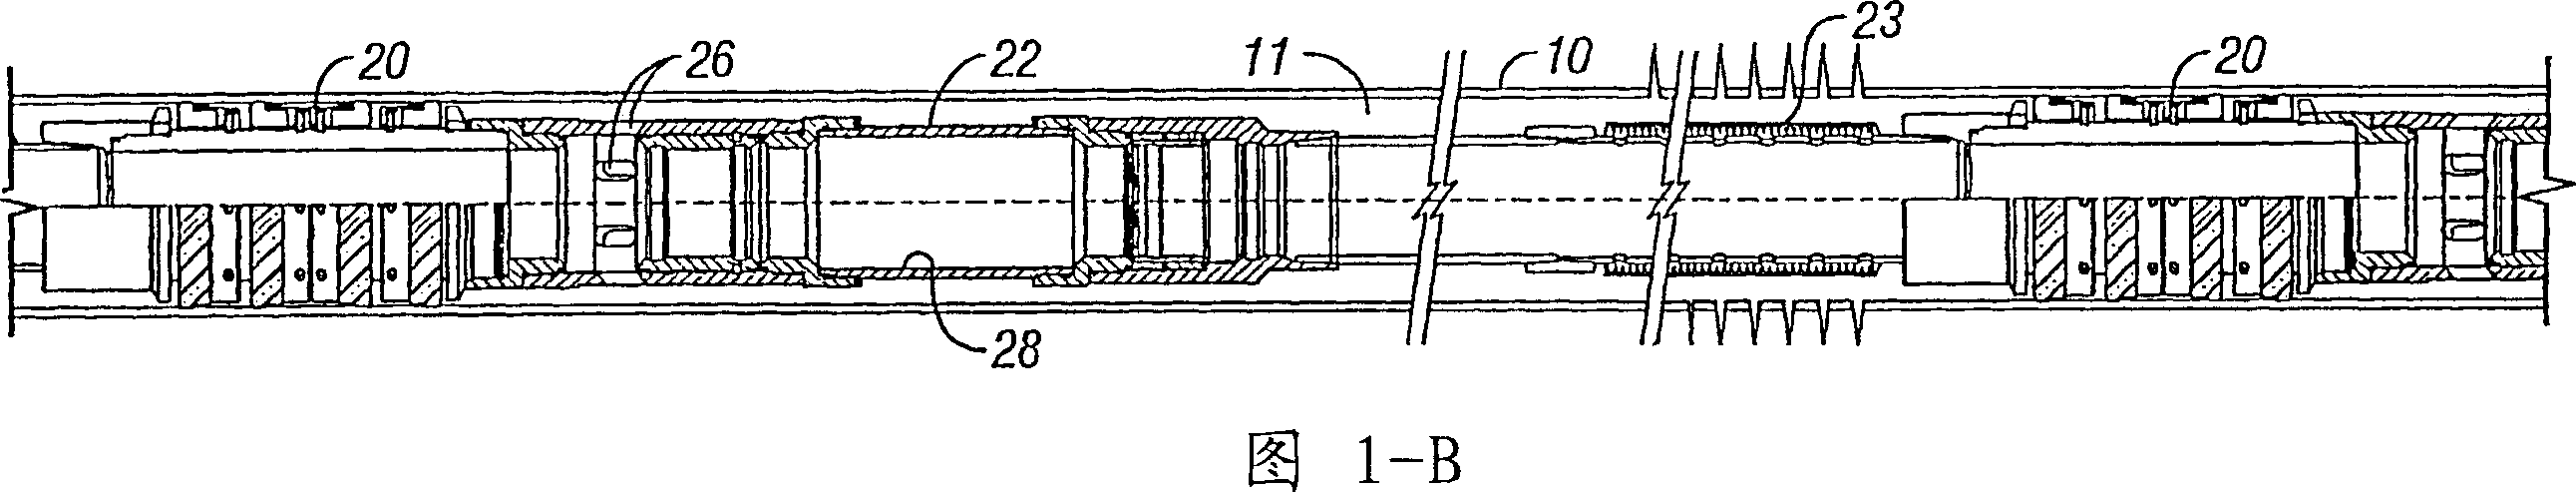 Method and apparatus for treating a subterranean formation